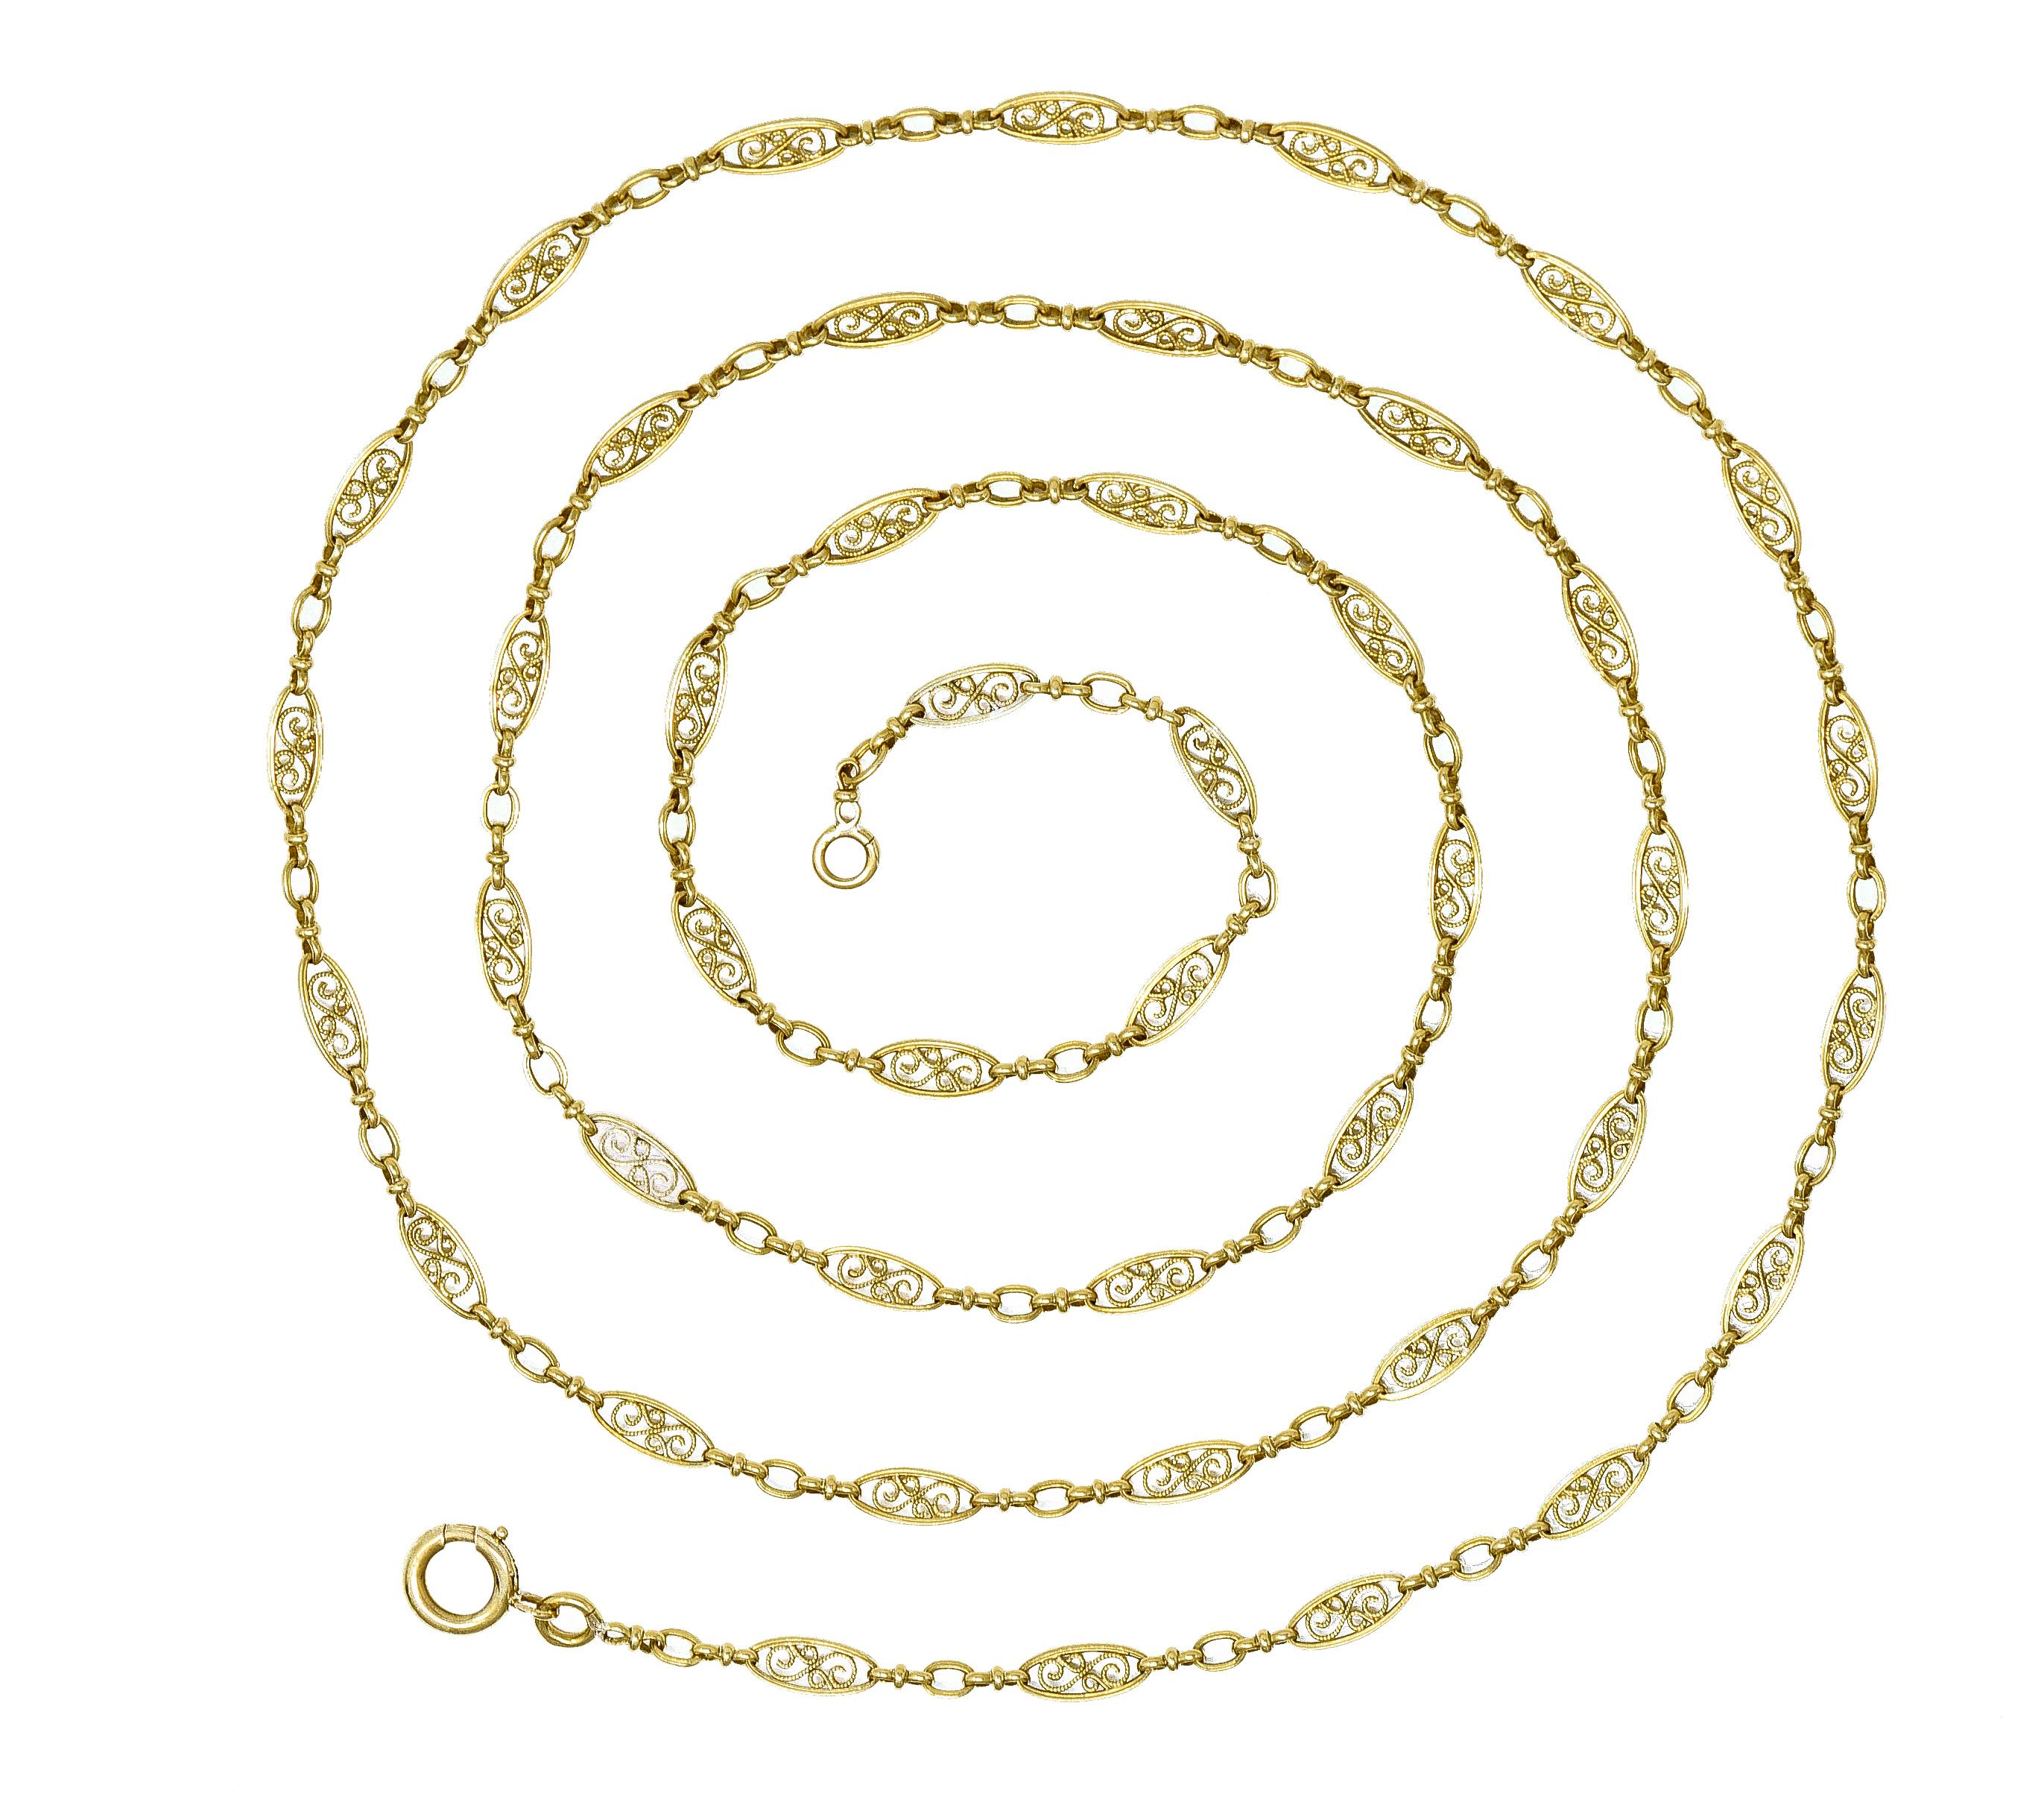 Comprised of navette-shaped links alternating with bisected and oval-shaped links
Each navette centers a filigree scroll motif with milgrain detail
Completed by spring clasp closure
With French hallmarks for 18 karat gold
Circa: 1860s
Width at